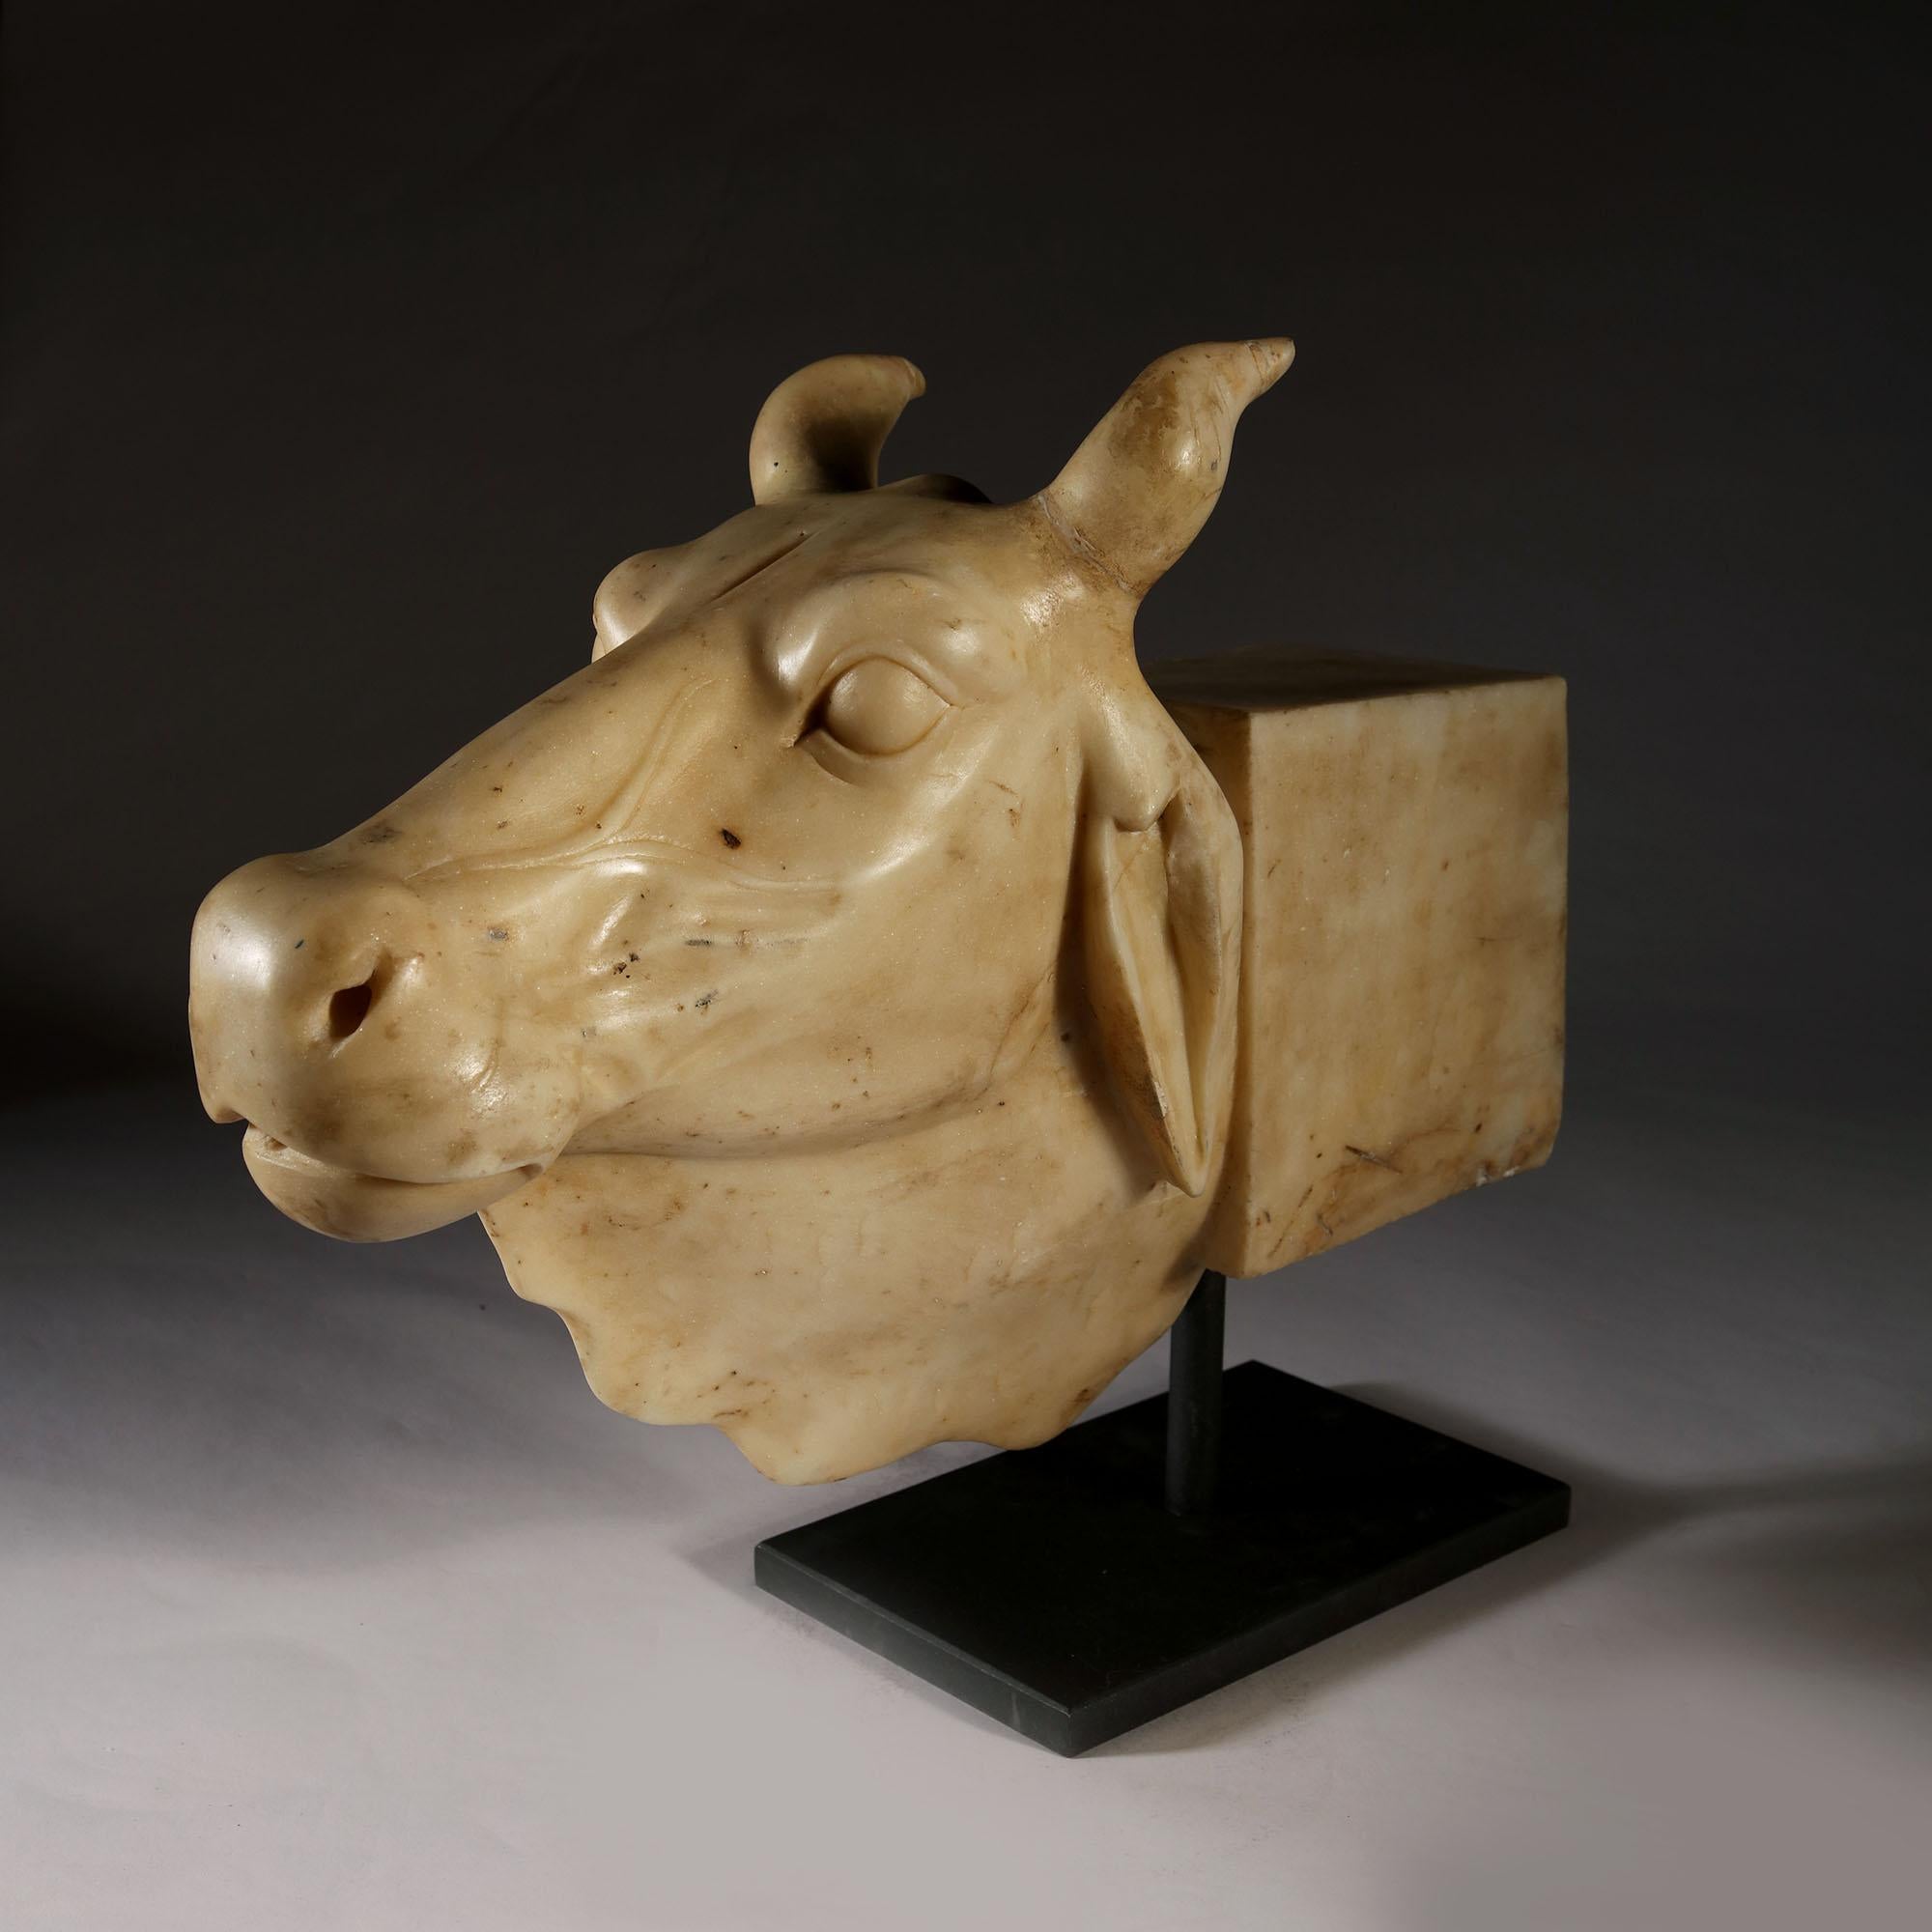 Carved Late 19th Century White Marble Sculpture of an Indian Nandi Bull